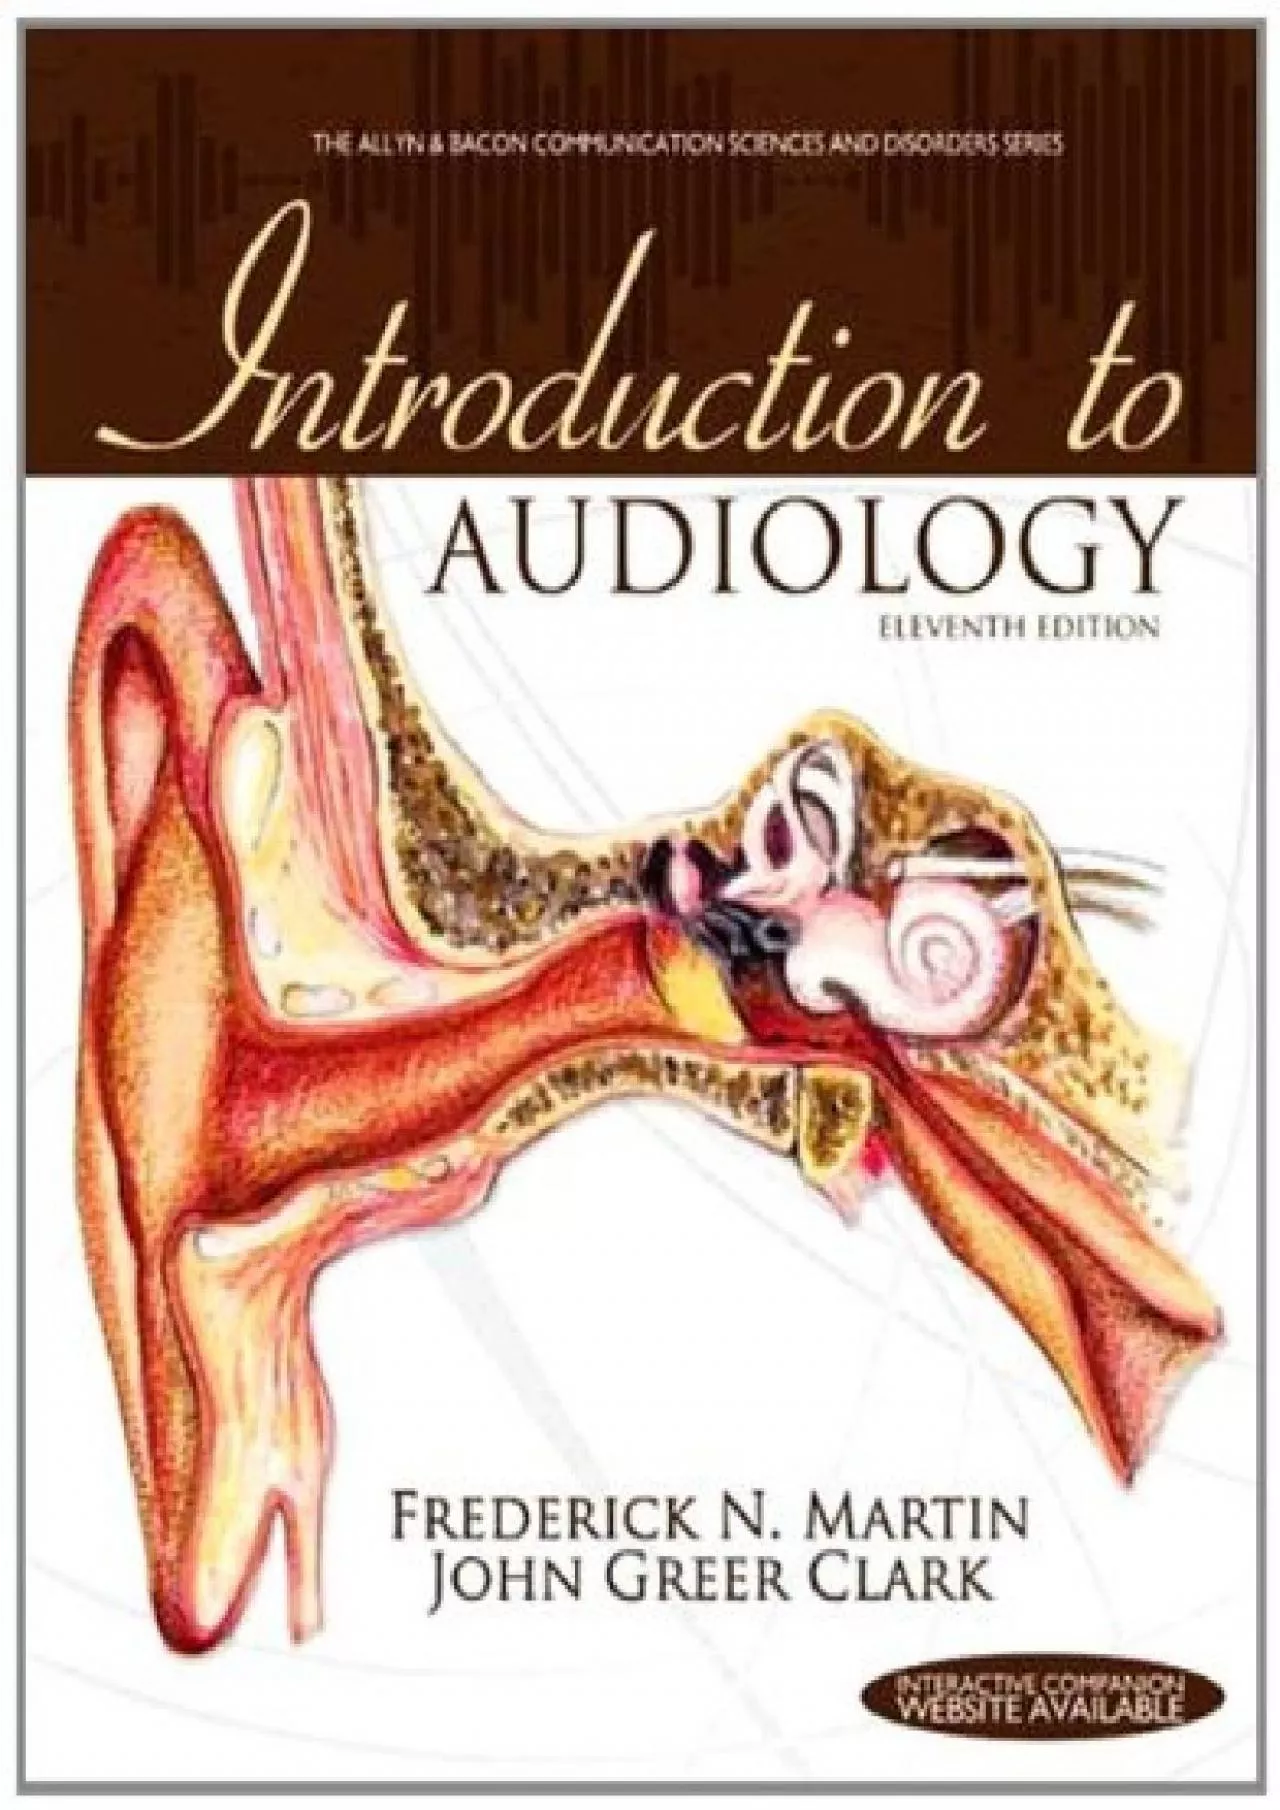 (EBOOK)-Introduction to Audiology (The Allyn & Bacon Communication Sciences and Disorders